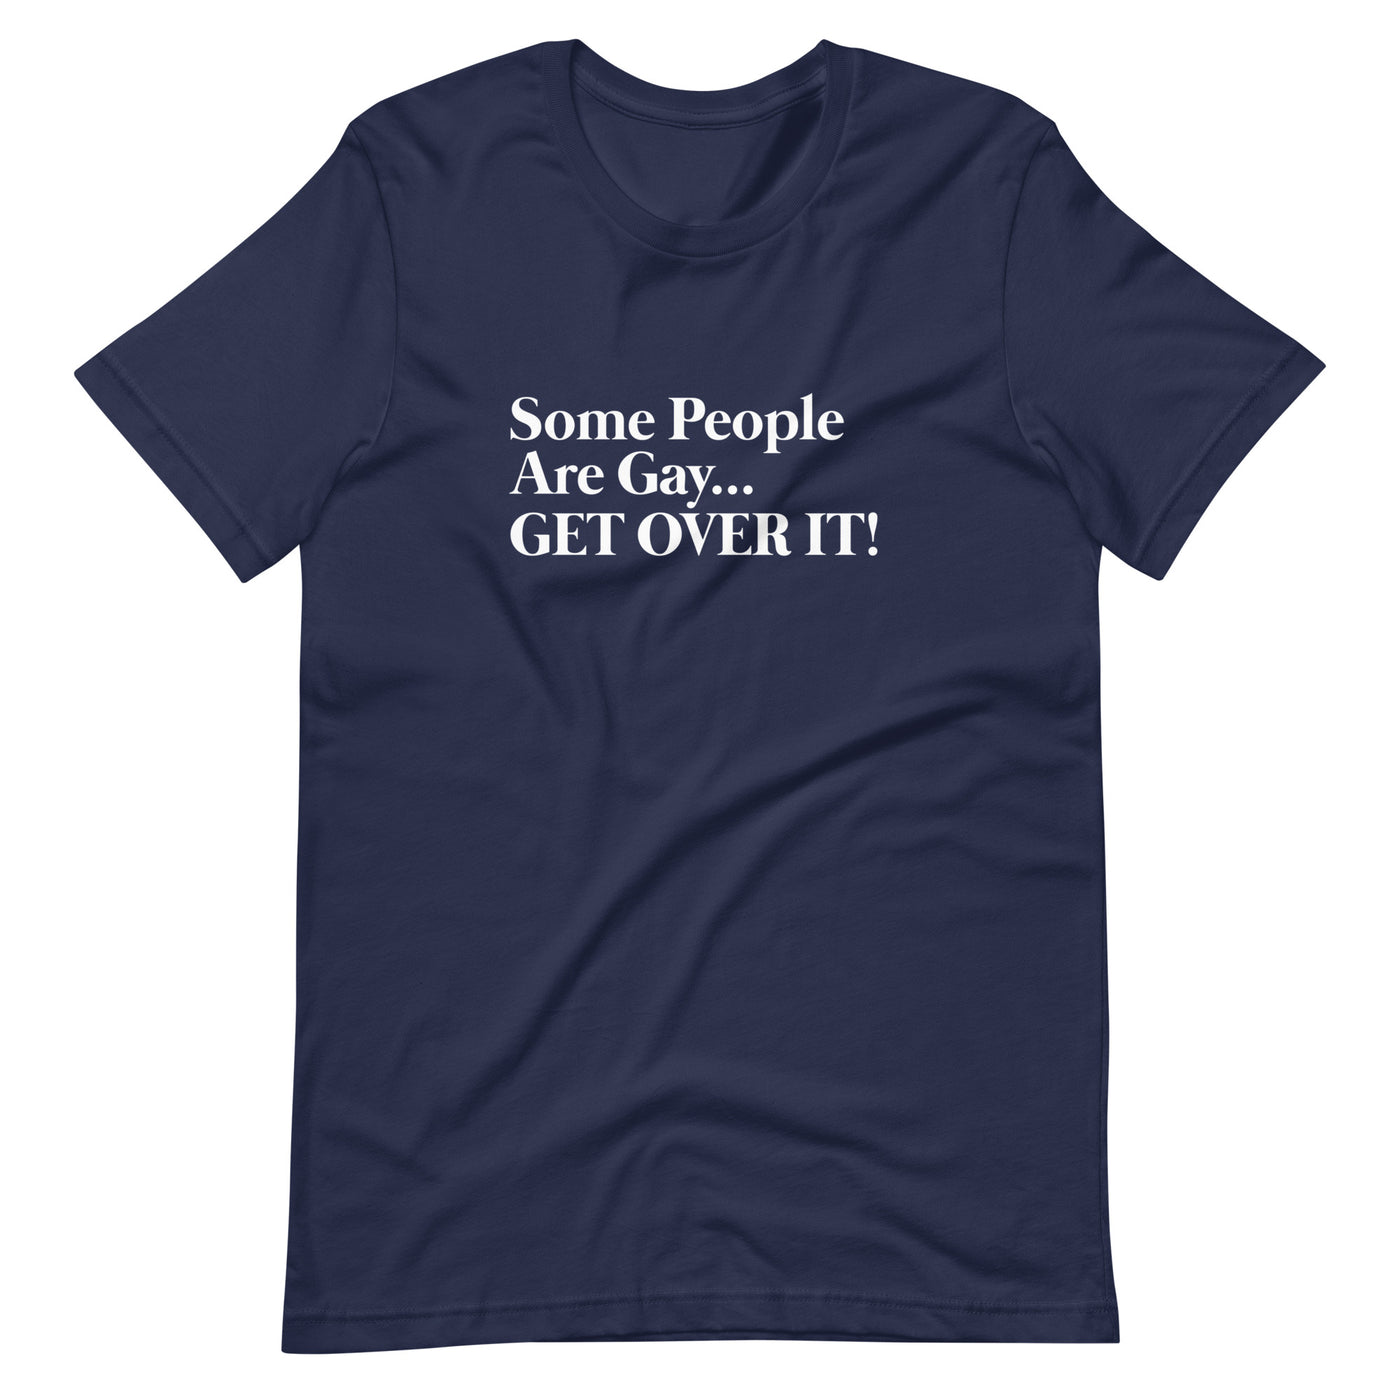 Pride Clothes - Witty & Gritty Some People Are Gay… Get Over It! TShirt - Navy